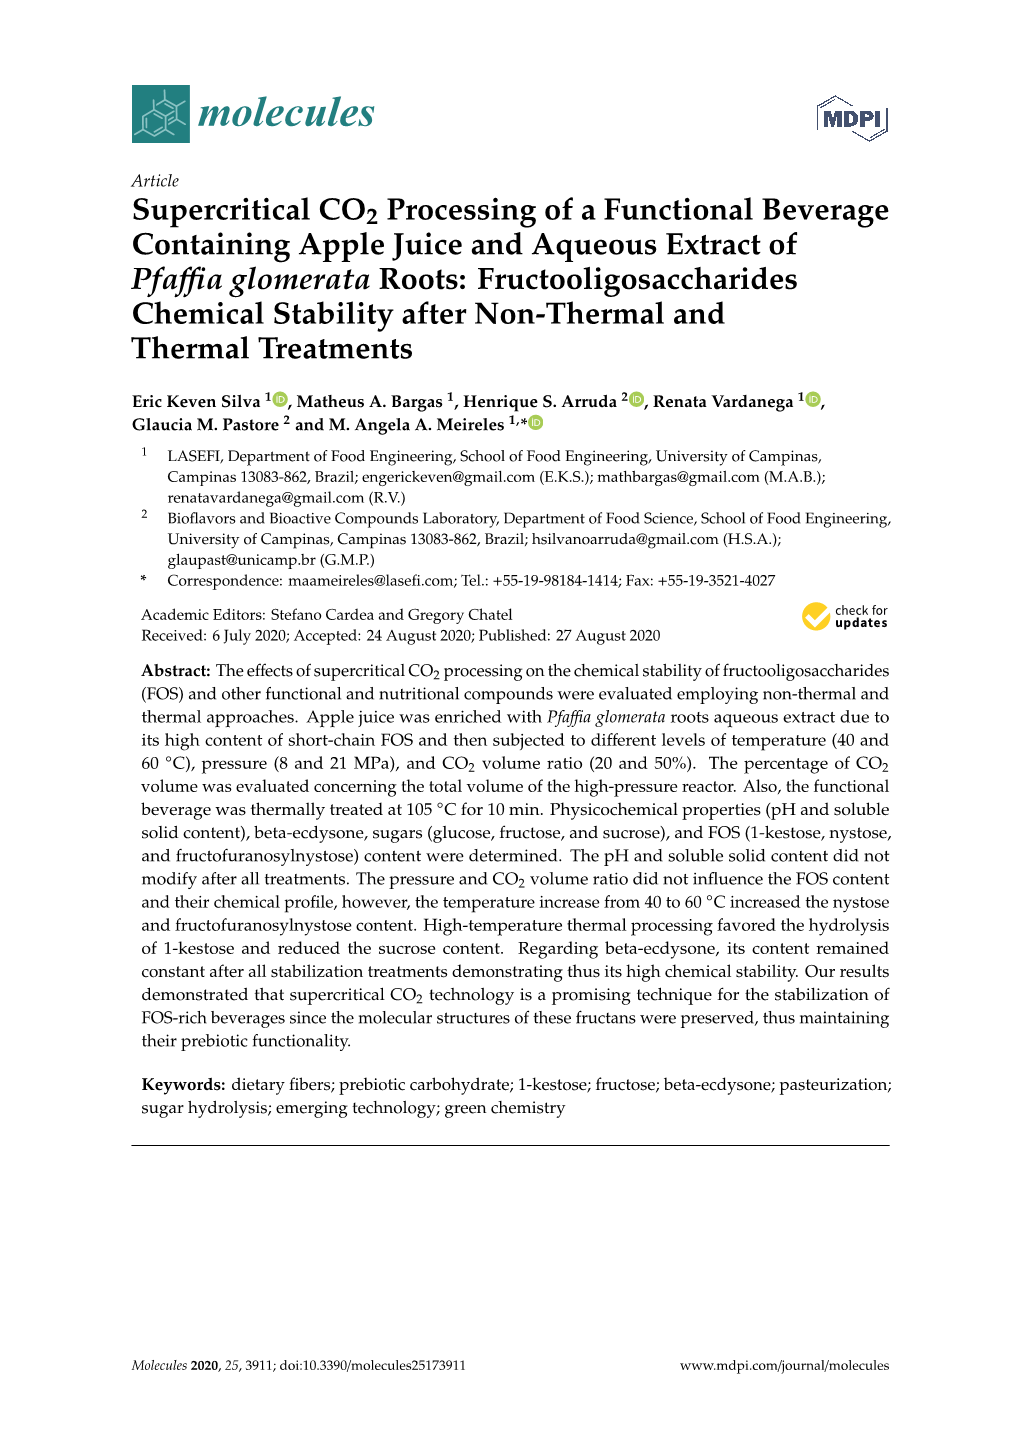 Supercritical CO2 Processing of a Functional Beverage Containing Apple Juice and Aqueous Extract of Pfaffia Glomerata Roots